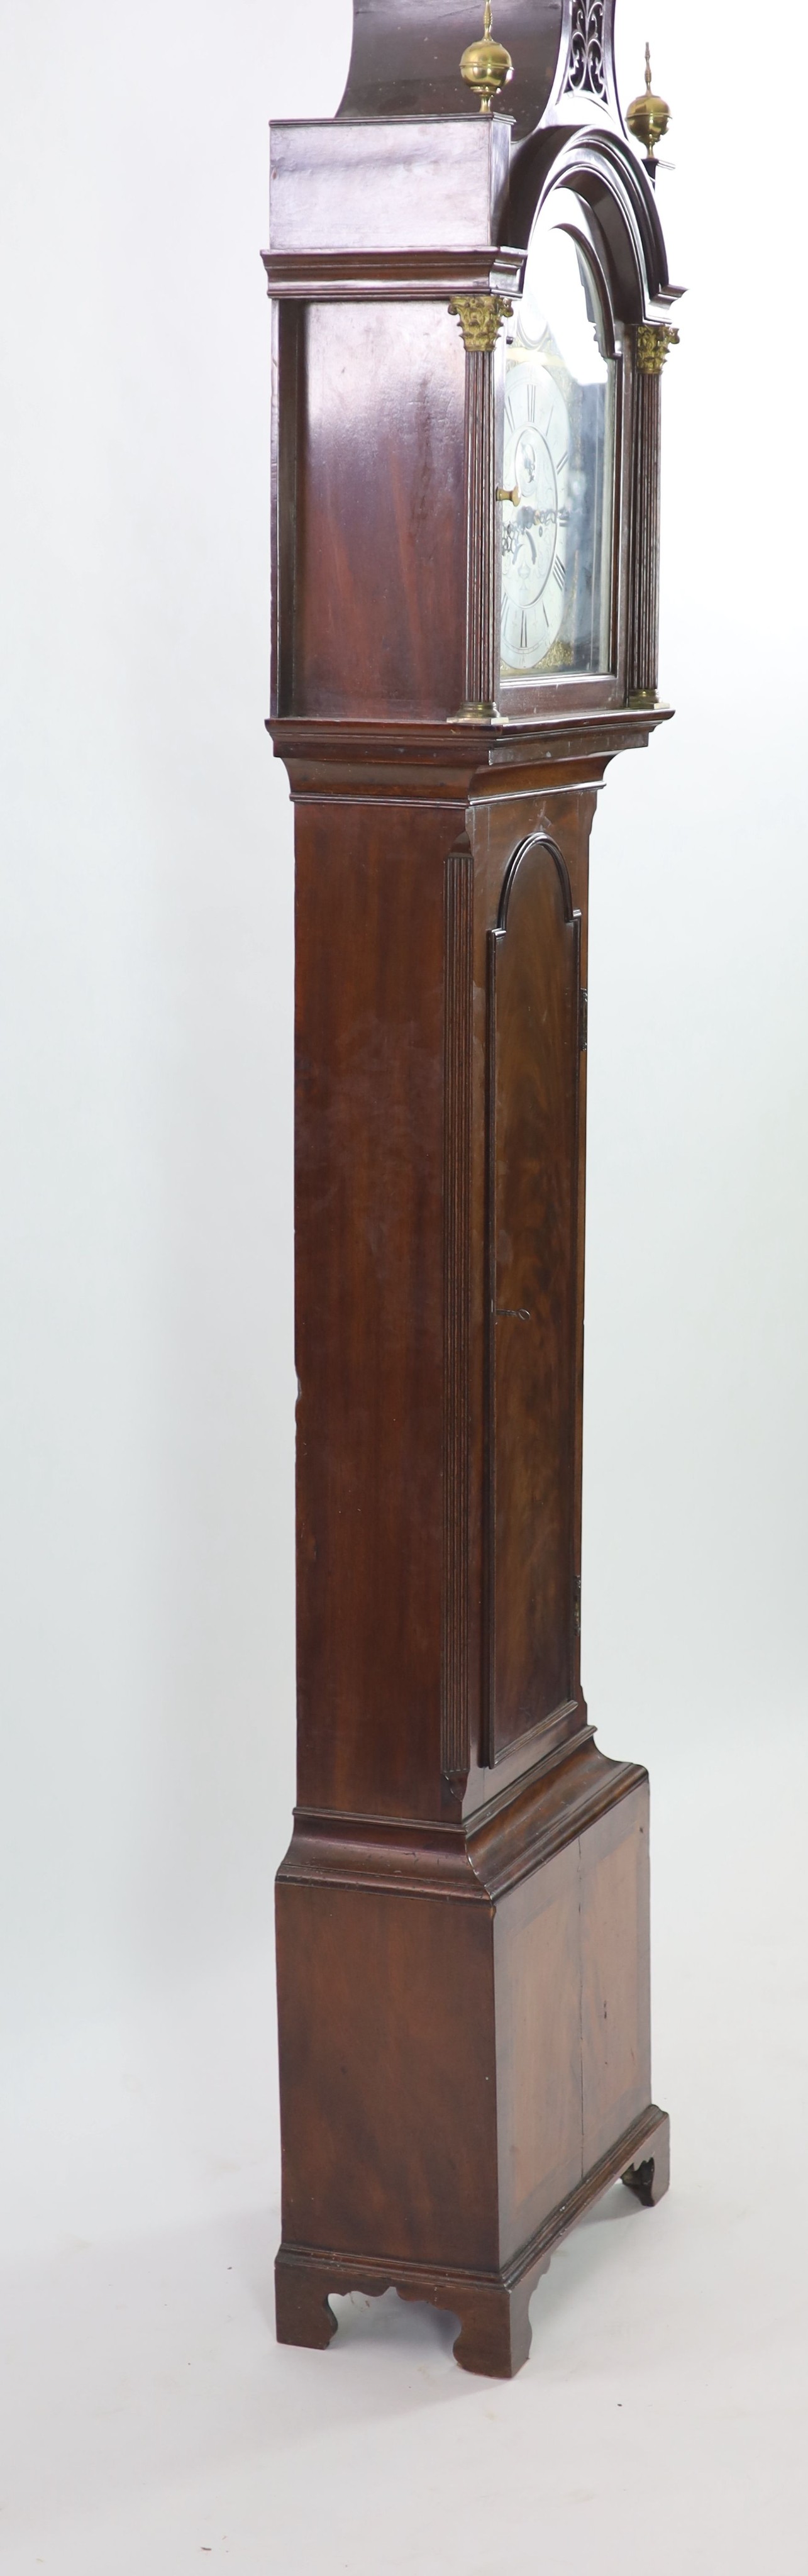 Richard Northen of Hull. A George III mahogany eight day longcase clock,the arched 12 inch brass - Image 3 of 6